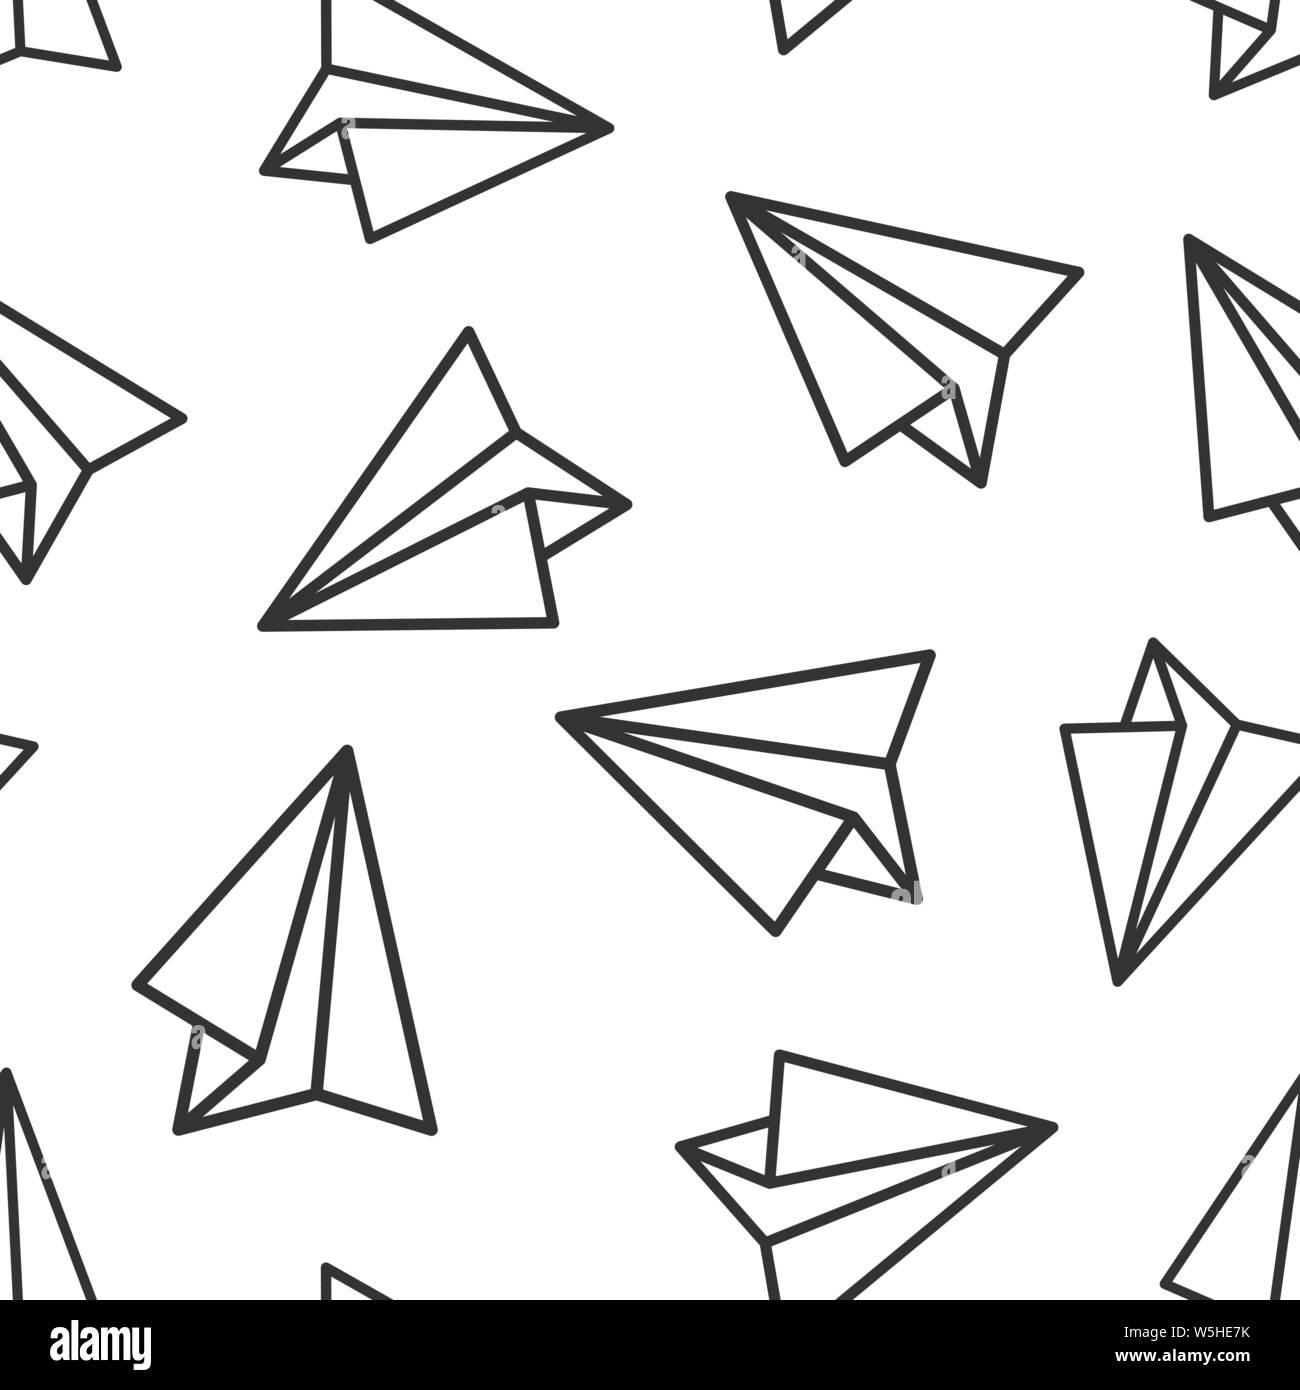 Paper airplane icon seamless pattern background. Plane vector illustration on white isolated background. Air flight business concept. Stock Vector